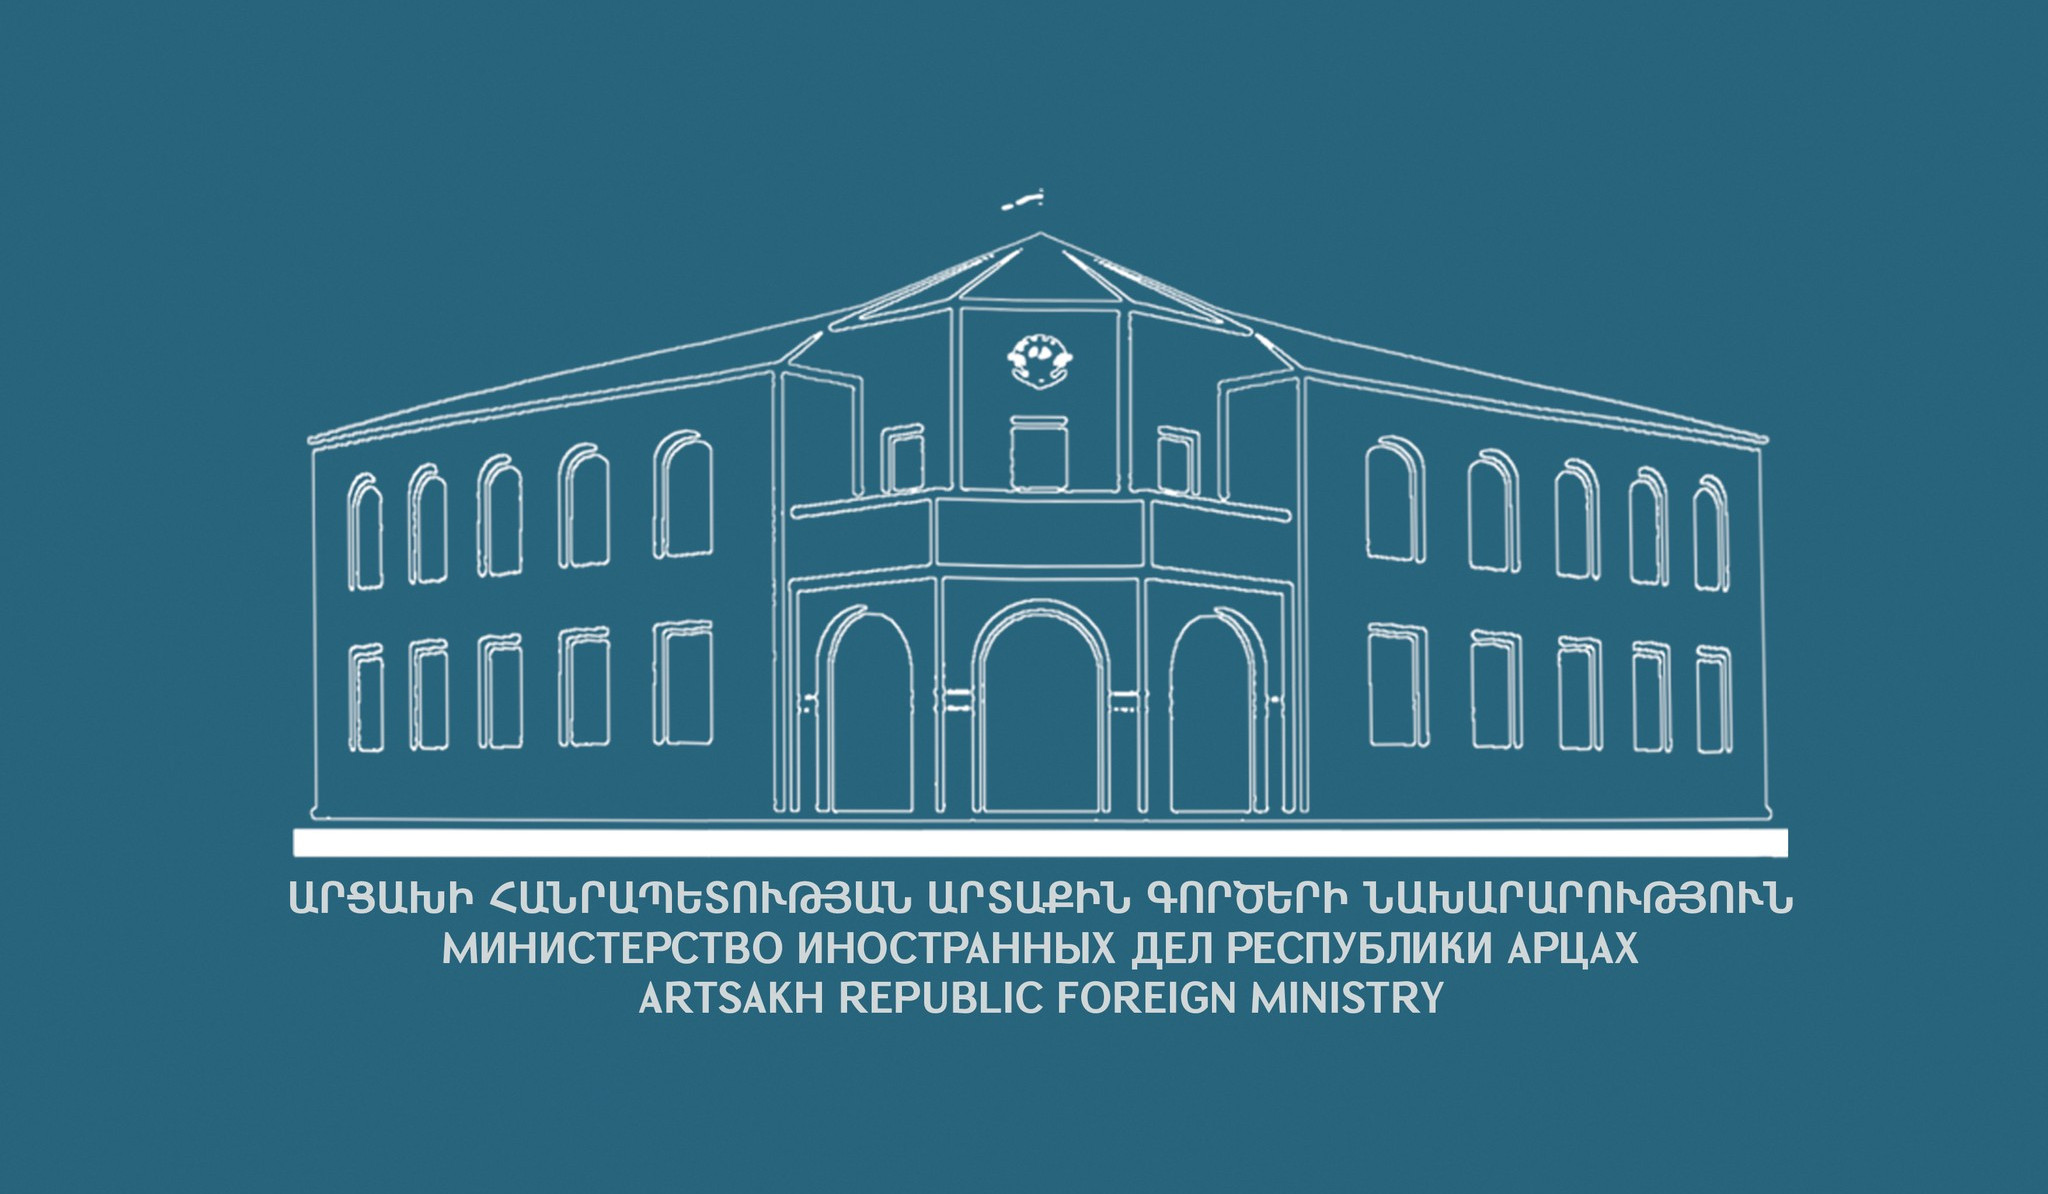 Statement of Artsakh Foreign Ministry on right of people of Artsakh to self-determination